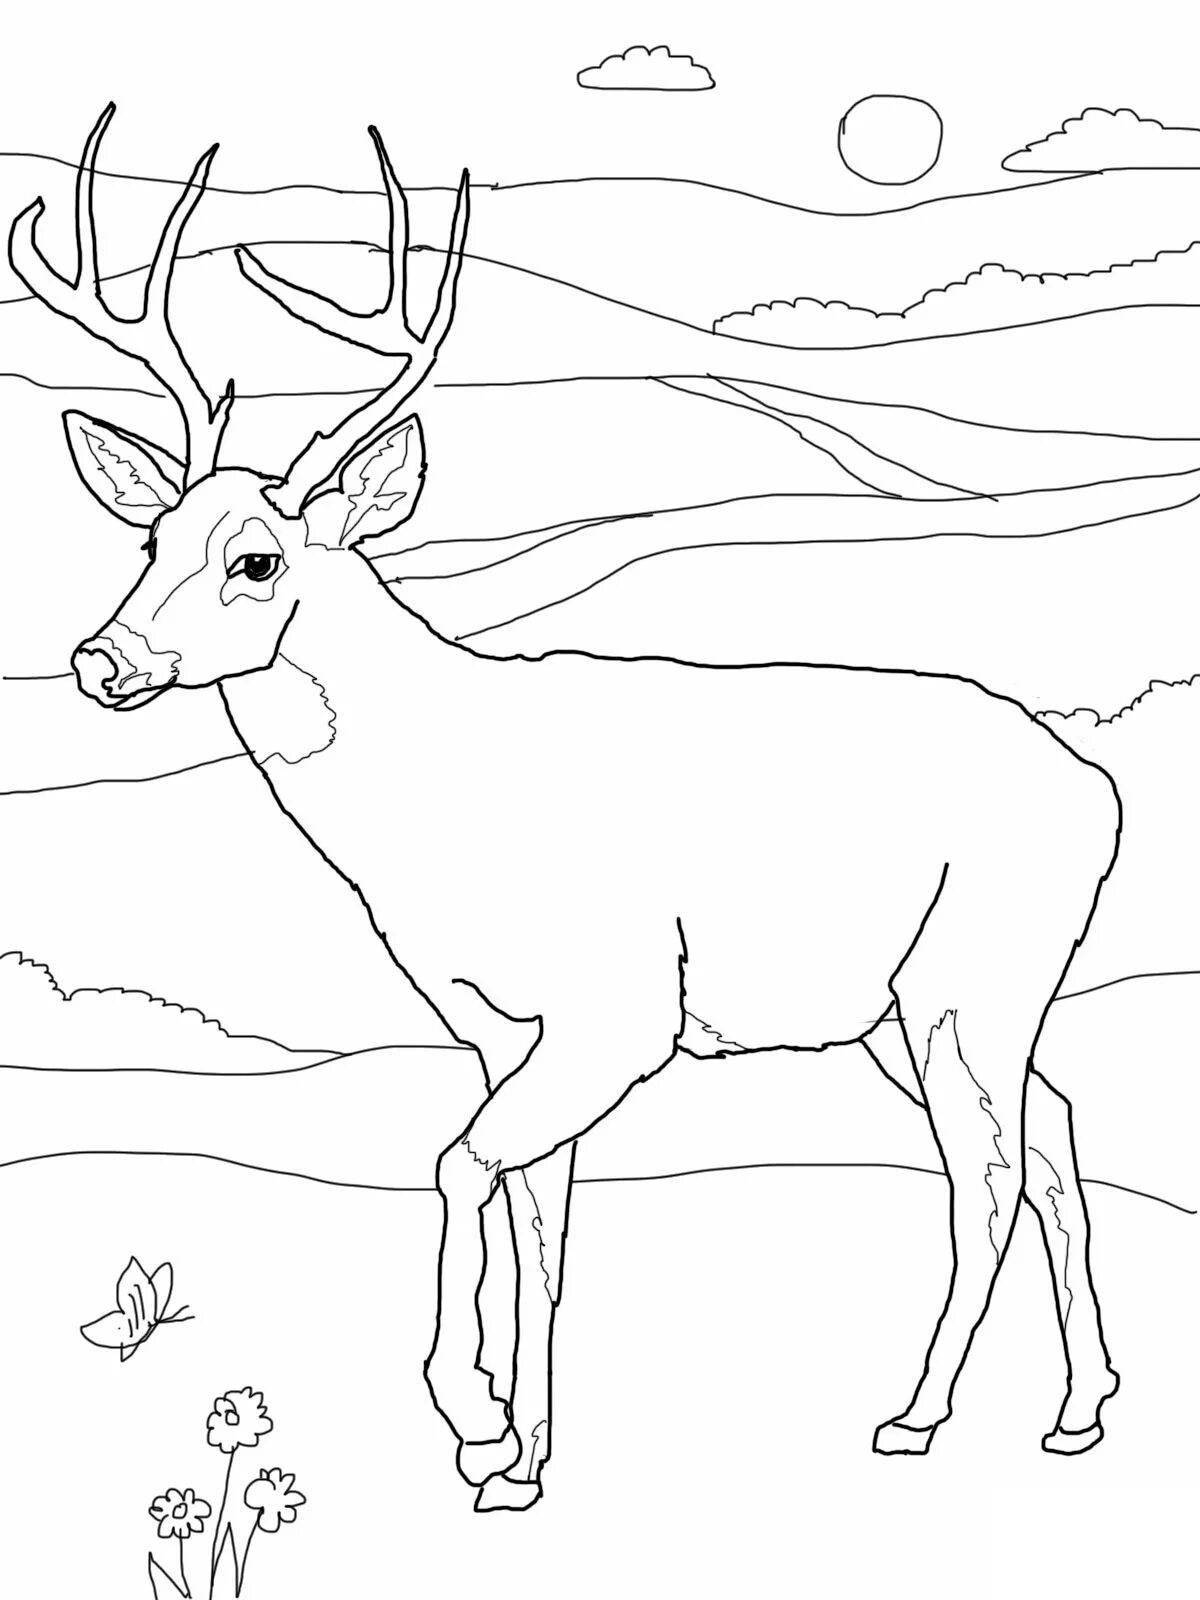 Blissful roe deer coloring book for kids